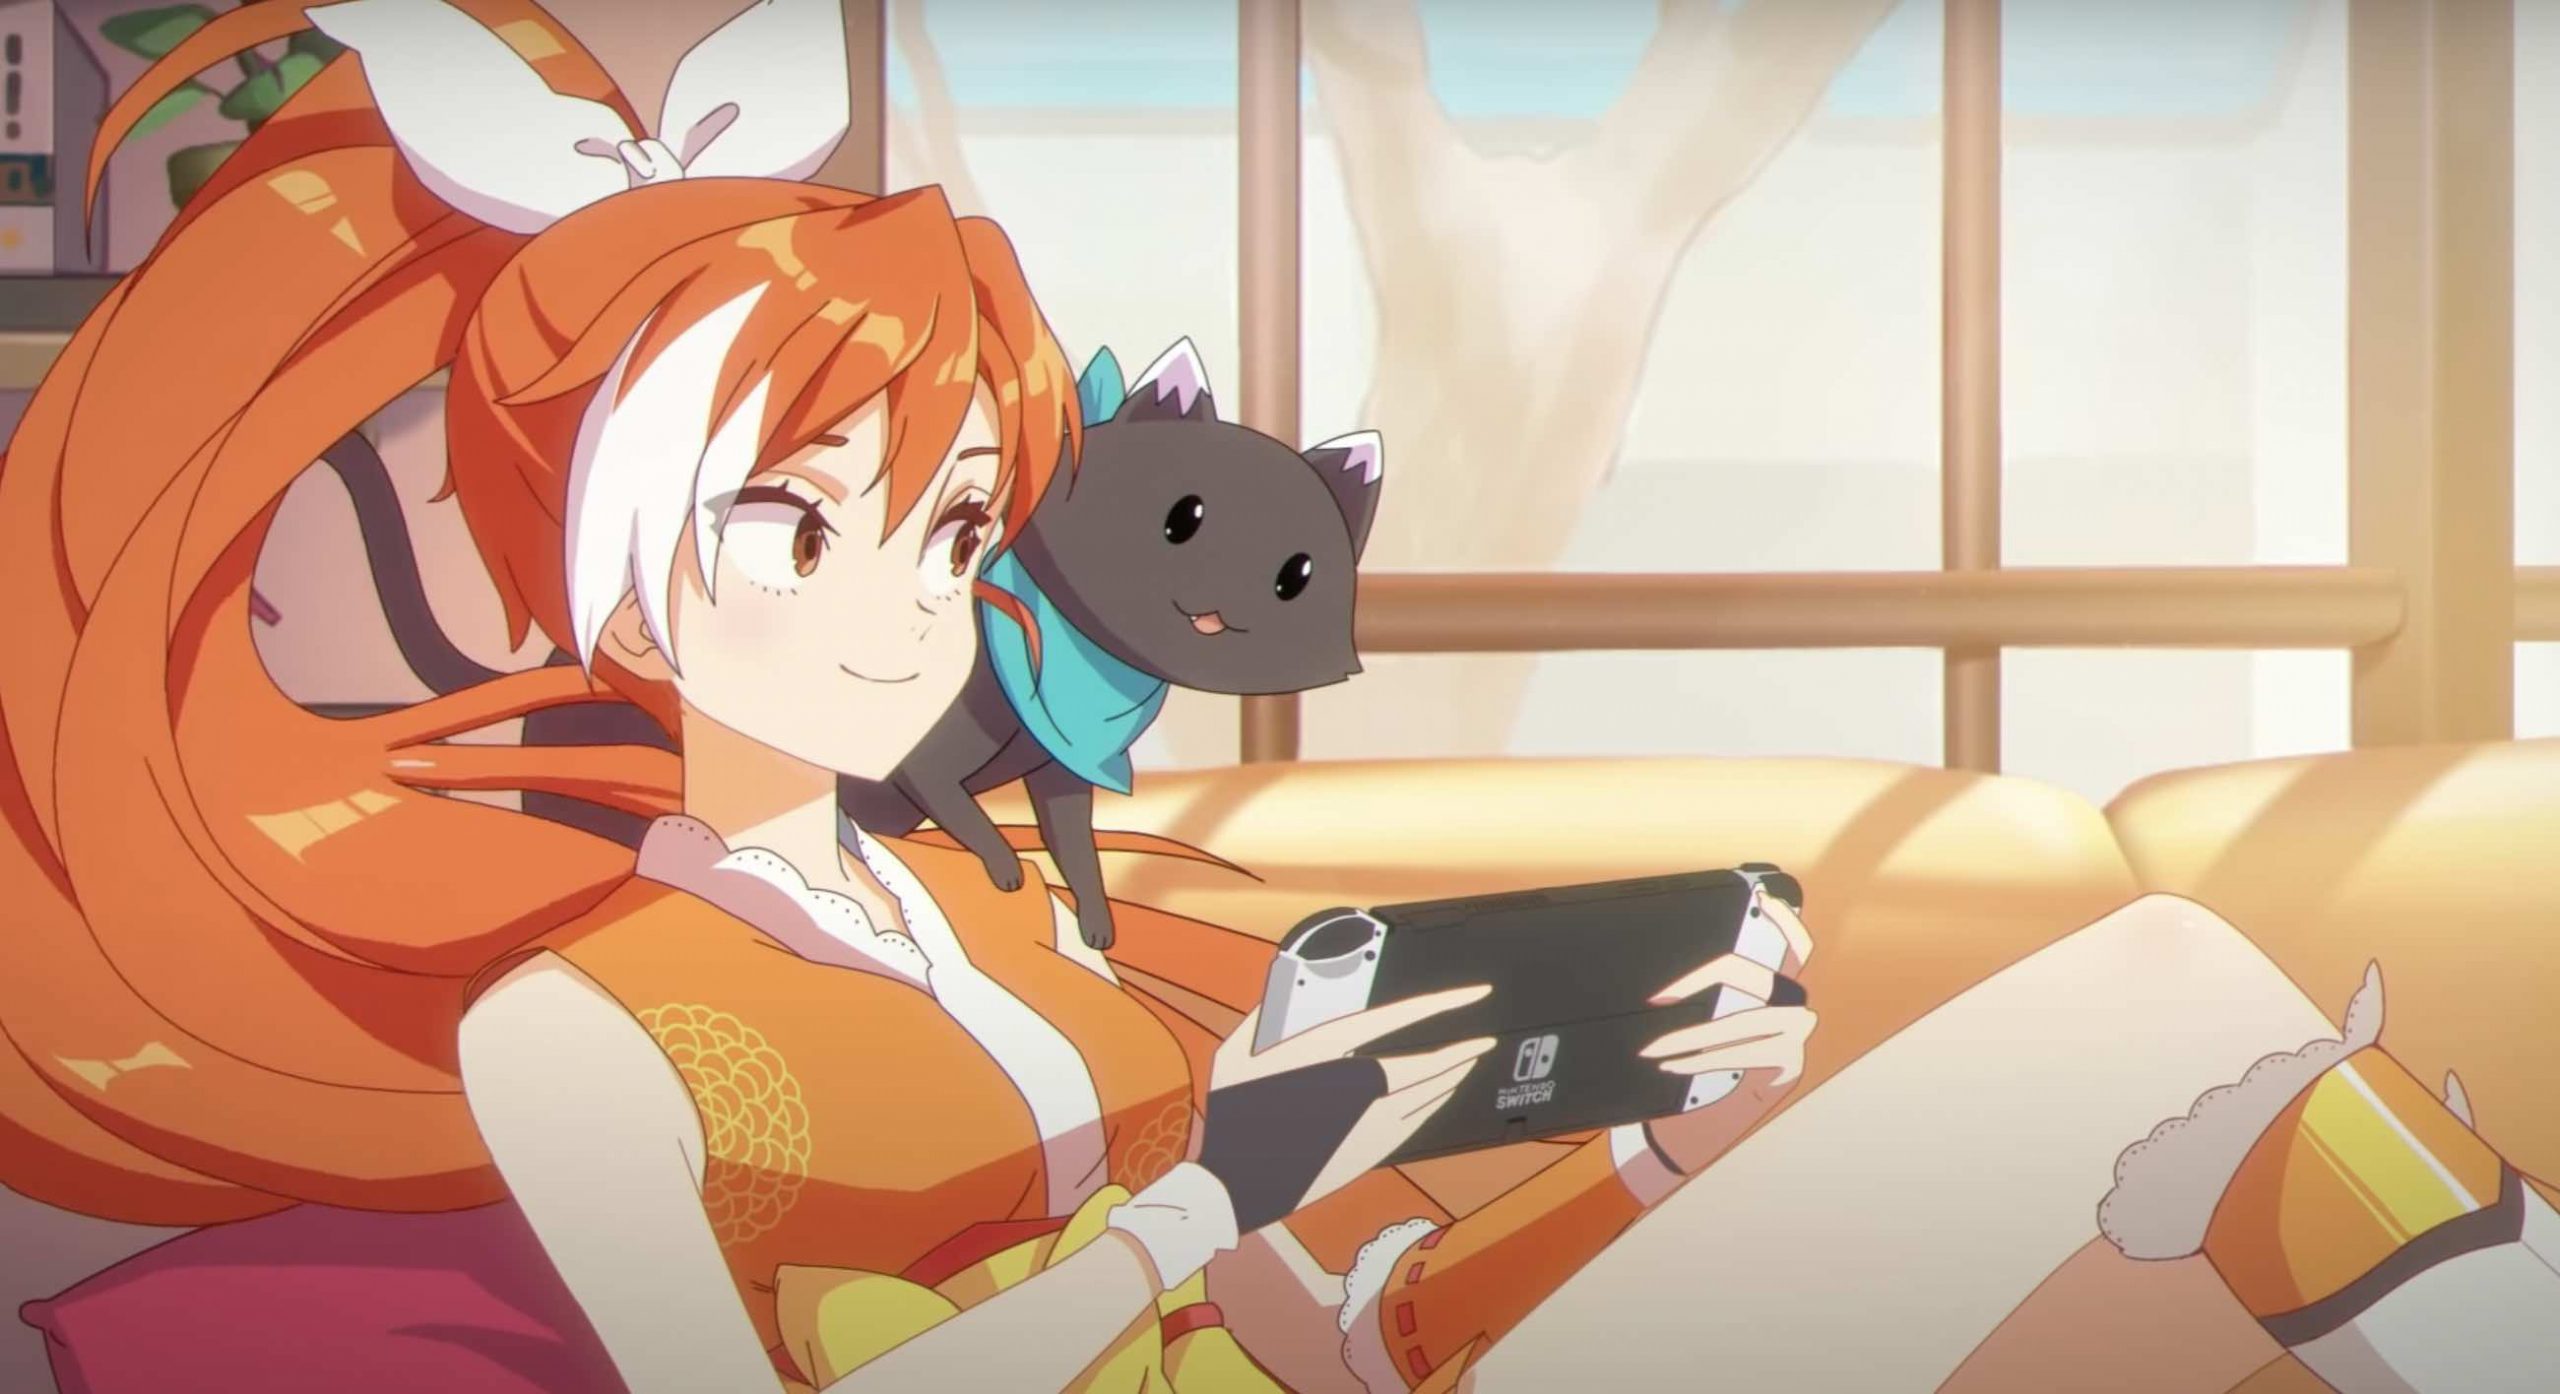 2D anime-inspired survival action game Lost Ruins announced for Switch